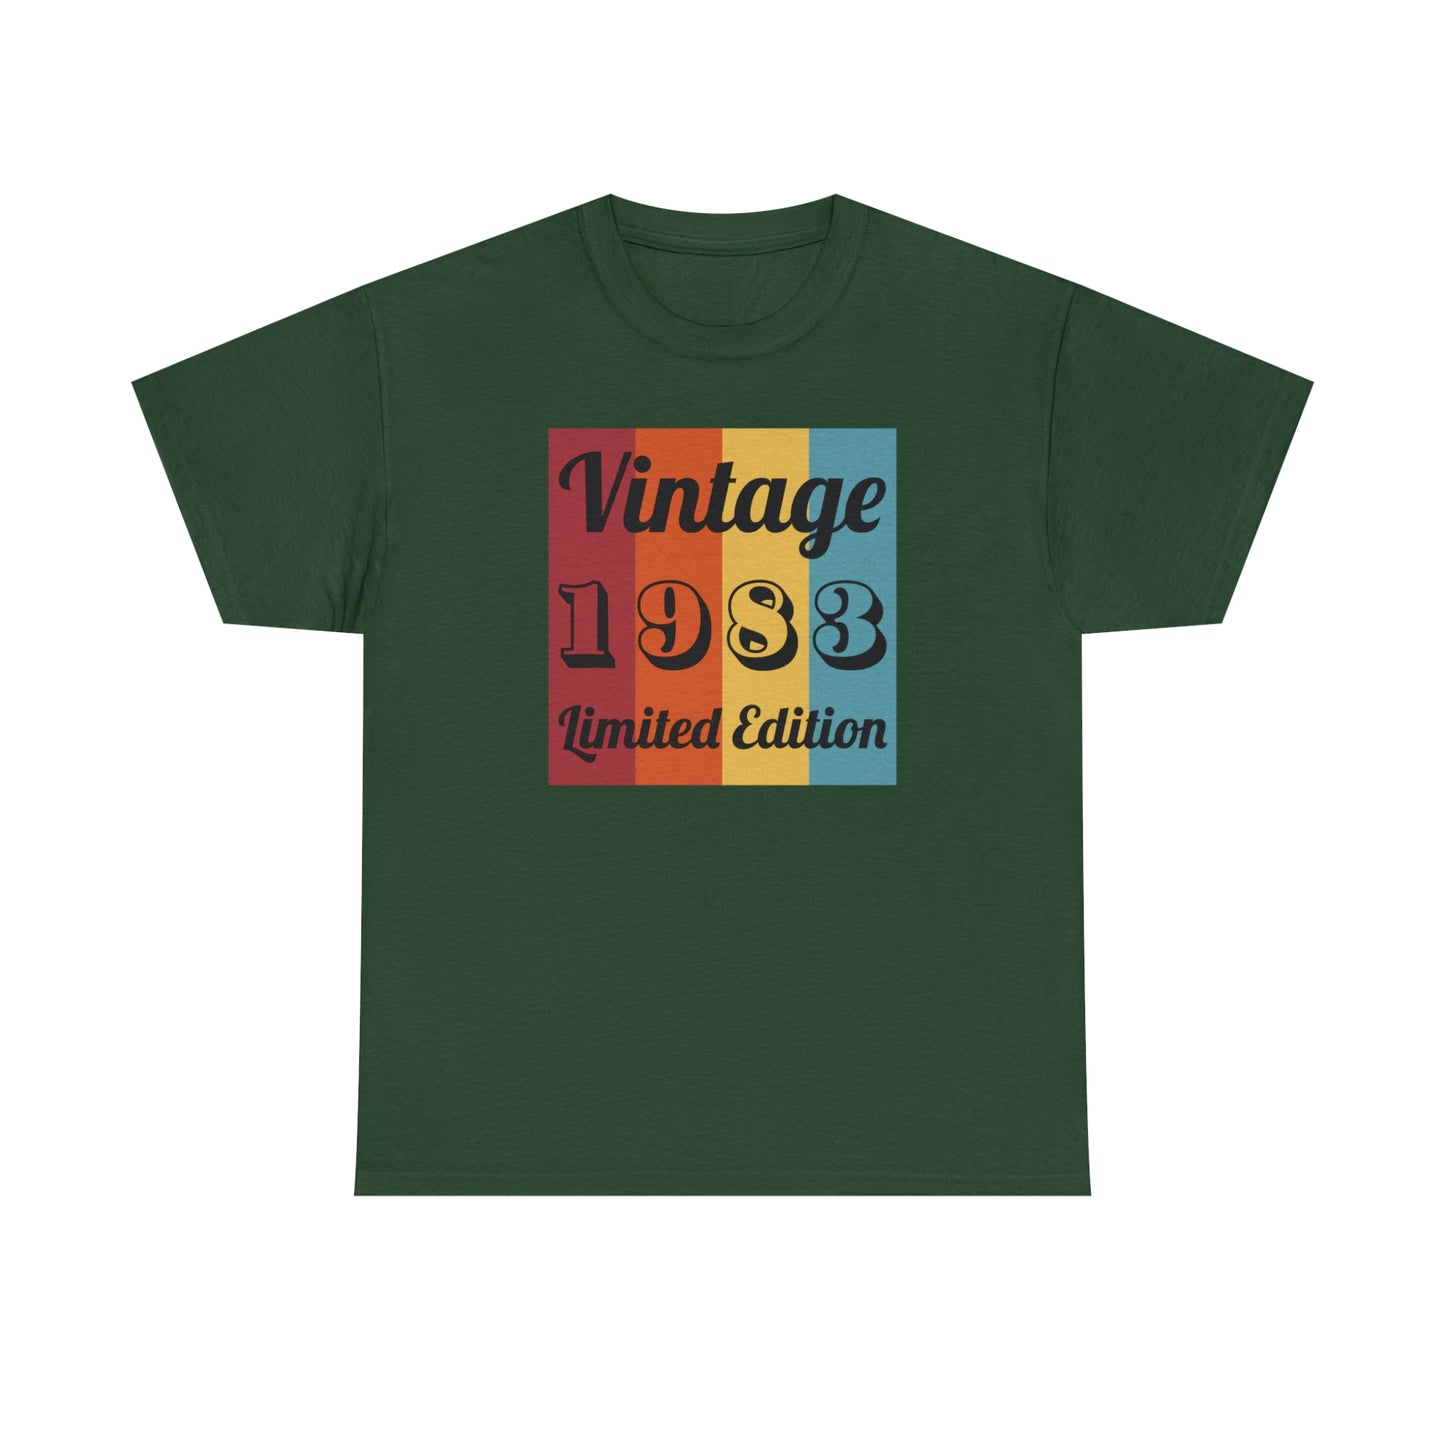 1983 T-Shirt For Vintage Limited Edition TShirt For Class Reunion Shirt For Birthday T Shirt For Birth Year Shirt For Graduation Year Shirt